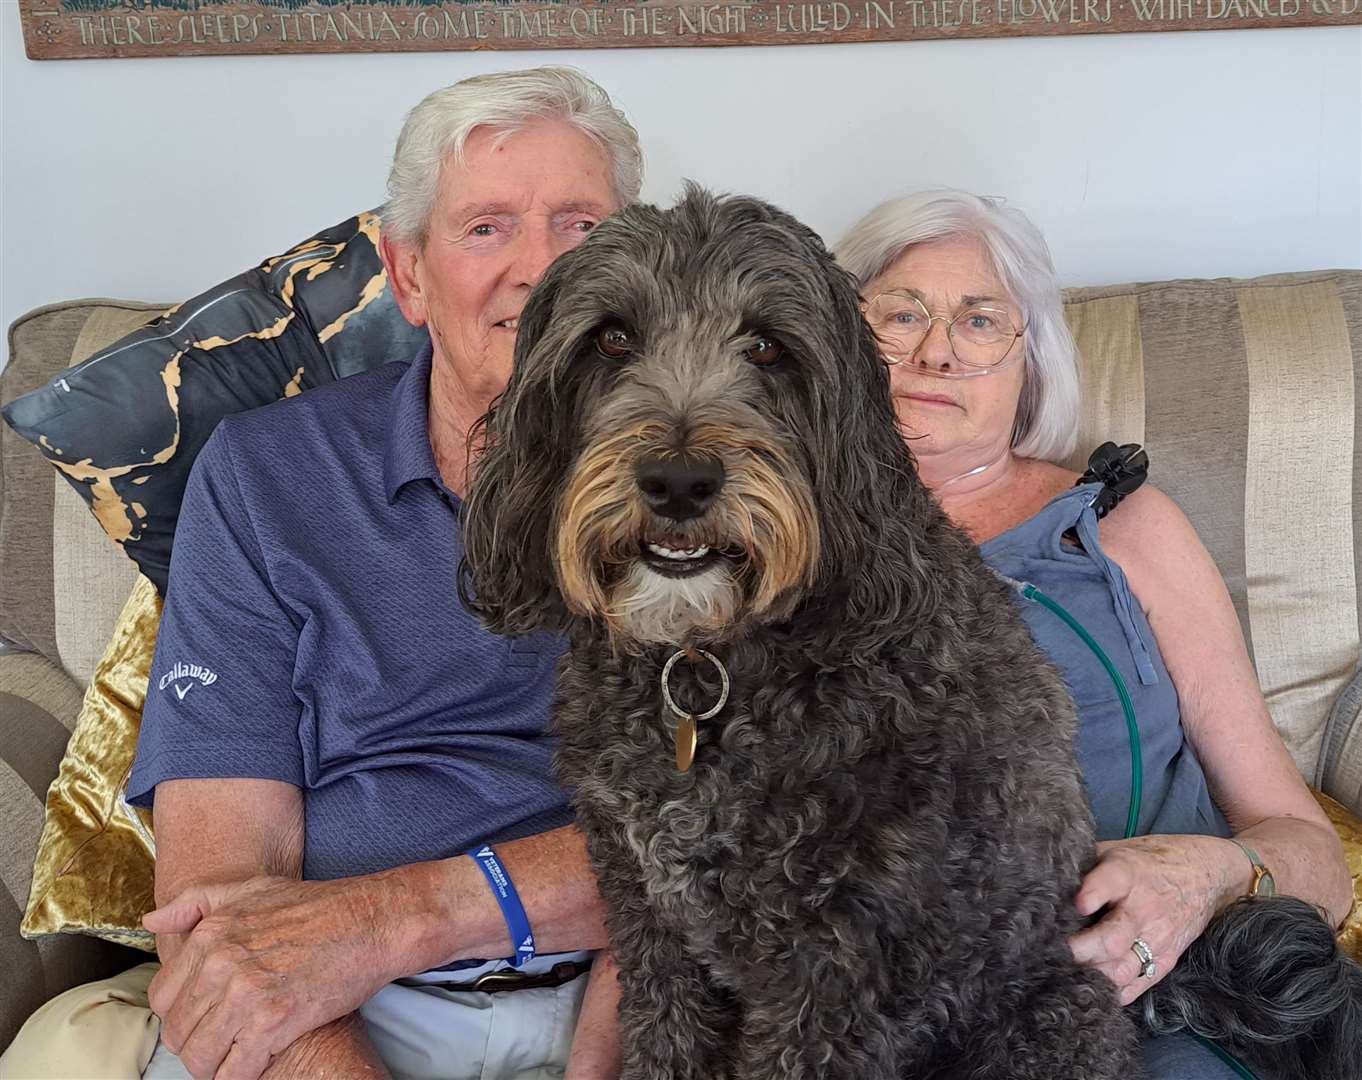 Bob and Jean Kelly, from Whitstable, with their beloved dog, who also visited the hospital